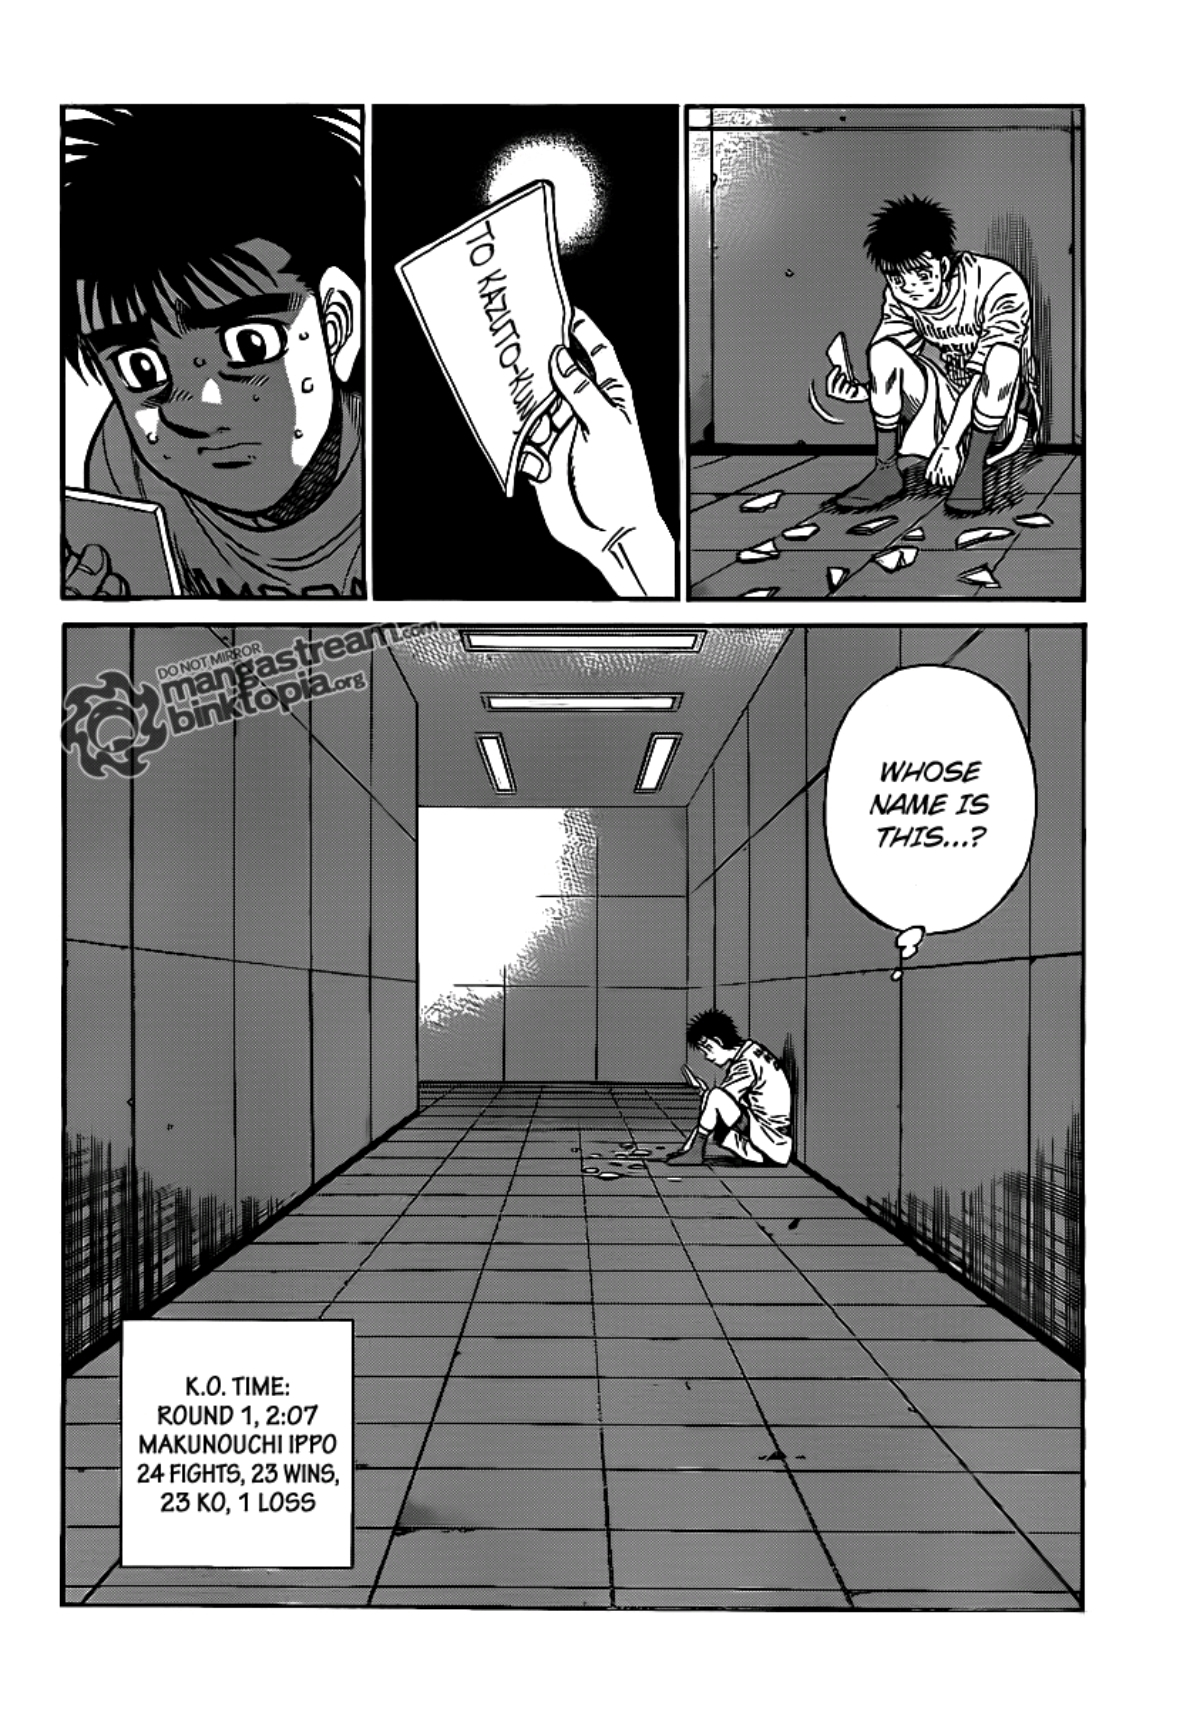 Ippo picks up the shreded remnants of a piece of paper, and wonders whose name is on it. His record is 24 fights, 23 wins, 1 loss. 